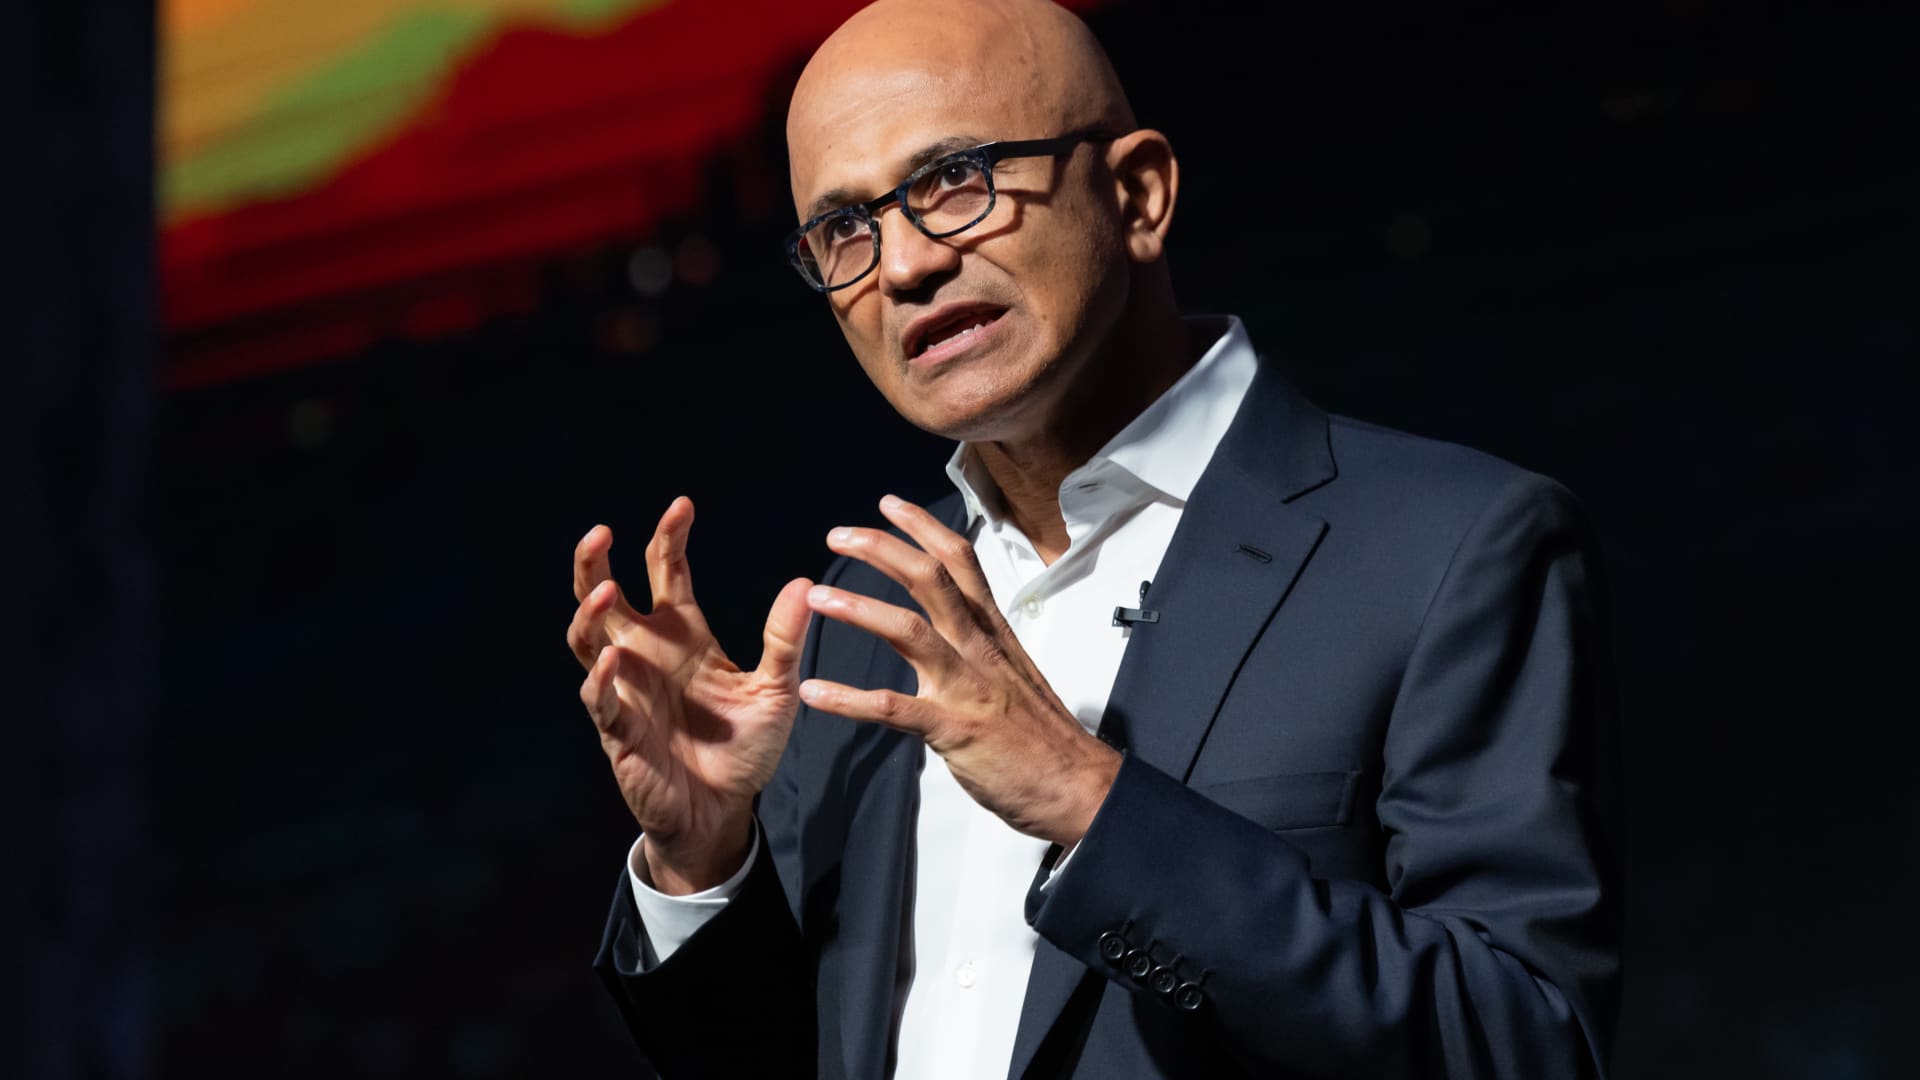 Microsoft warns of service disruptions if it can’t get enough A.I. chips for its data centers